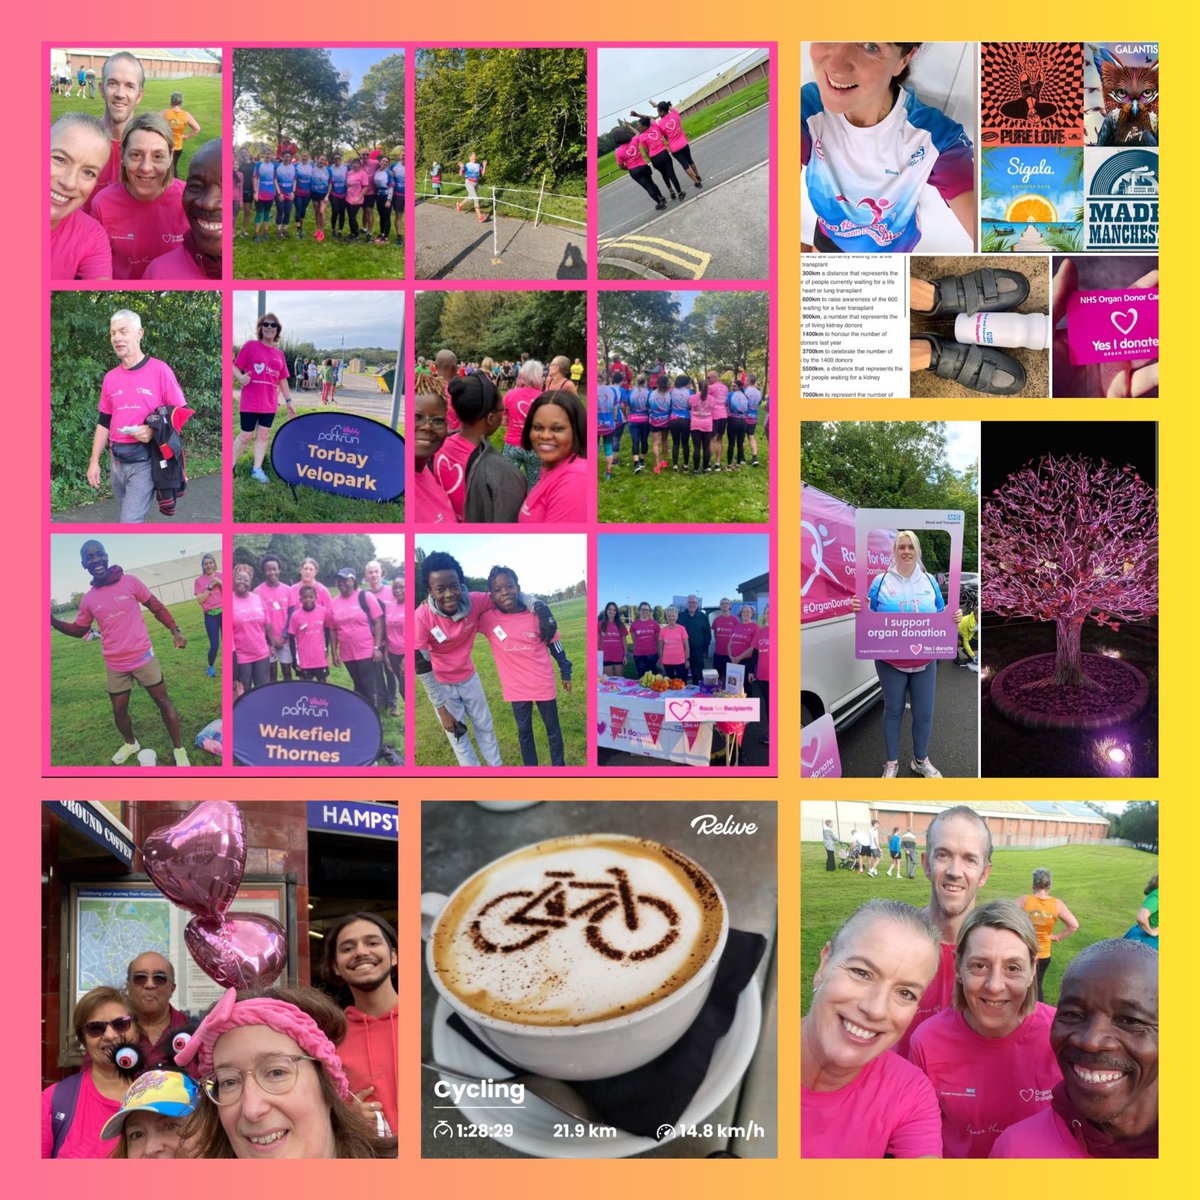 Day 8 #RaceforRecipients Your daily summary in pictures… Enjoy!!